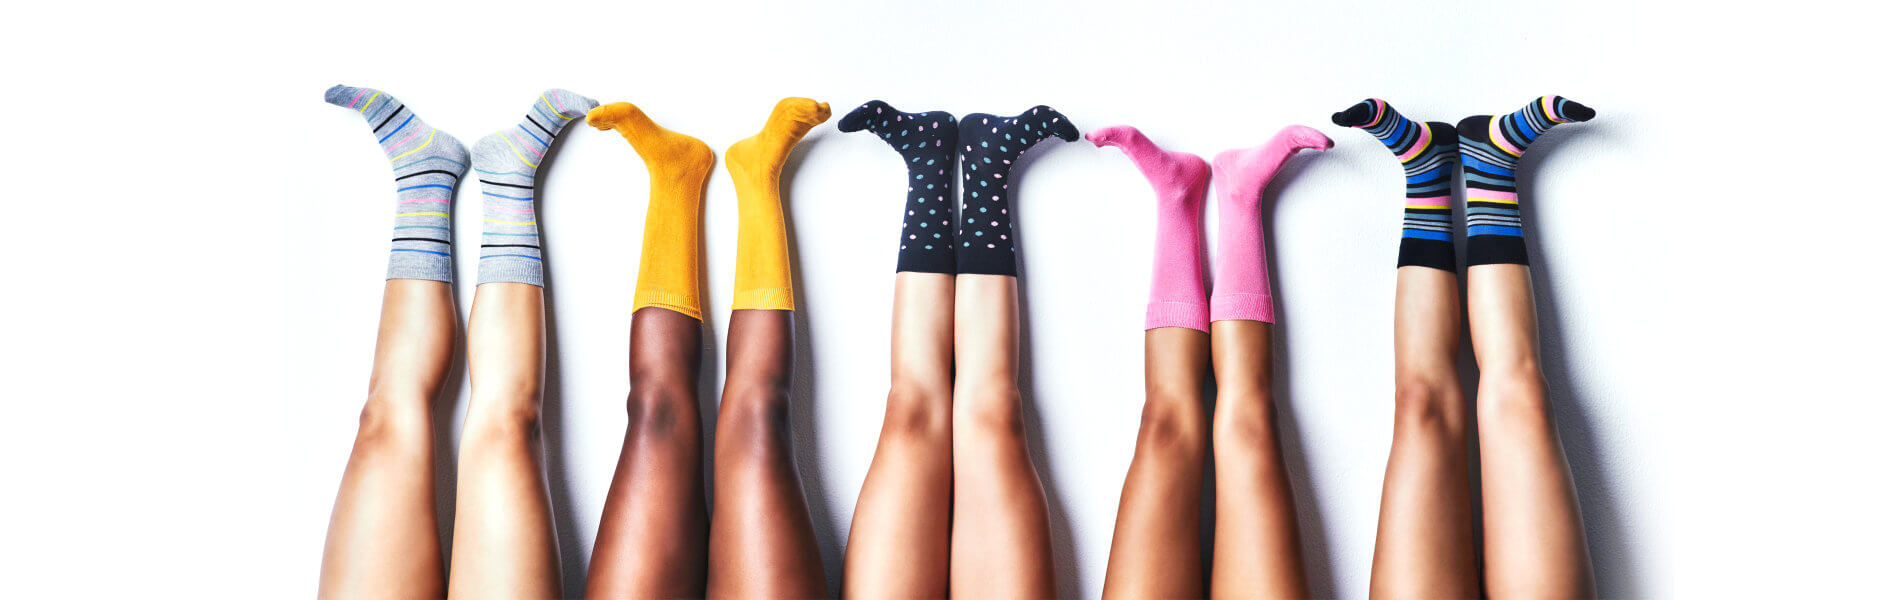 a series of 4 sets of legs sticking up with various coloured socks on each